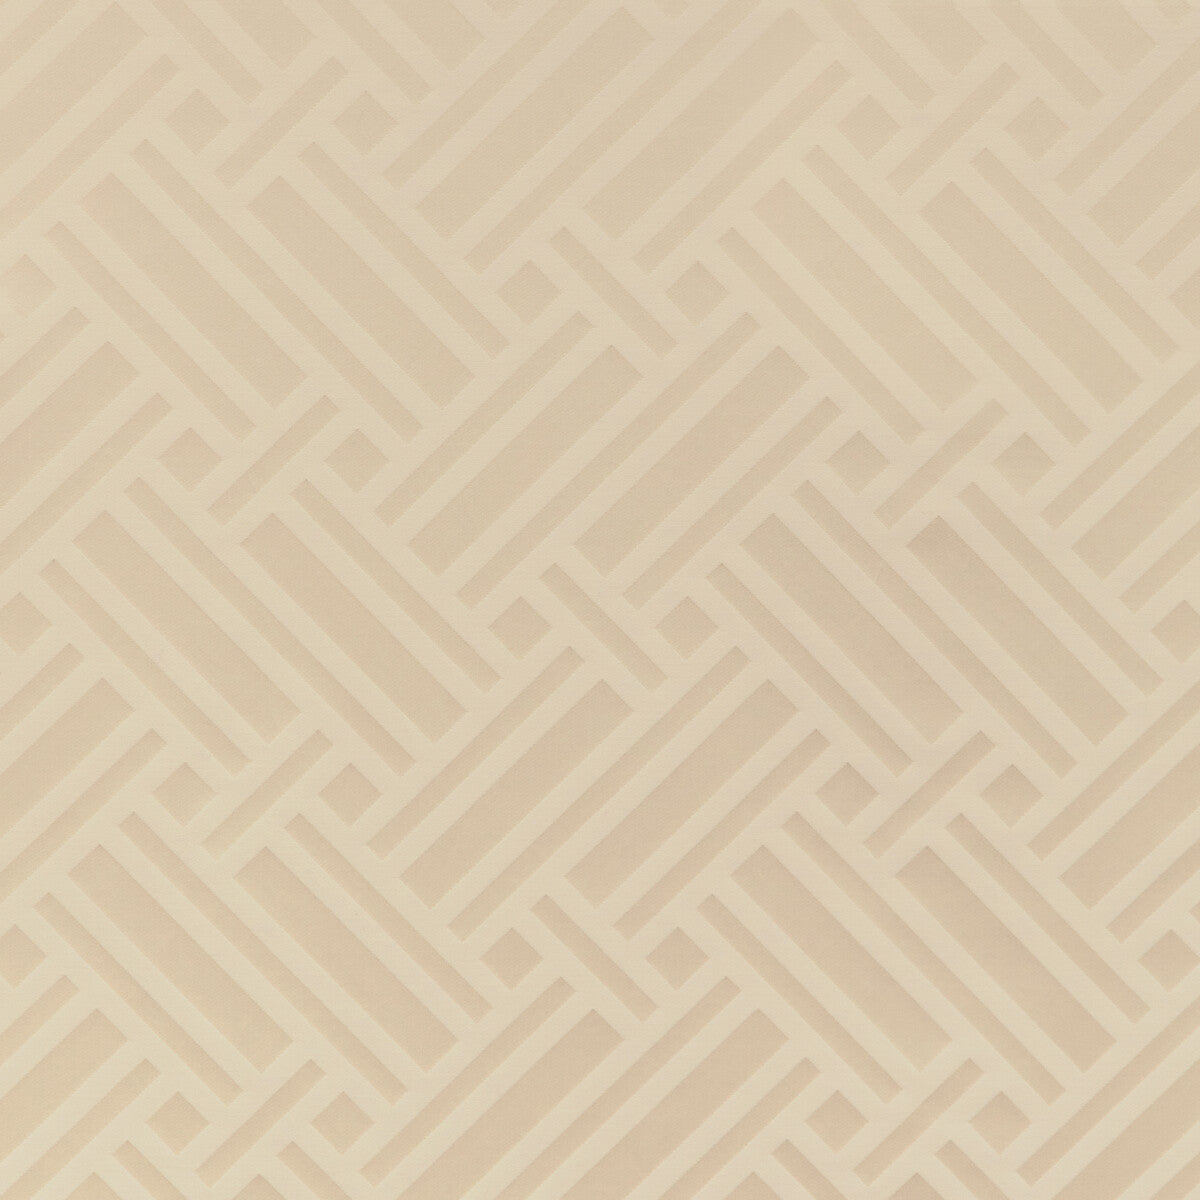 Martel Weave fabric in cream color - pattern 8023144.16.0 - by Brunschwig &amp; Fils in the Vienne Silks collection